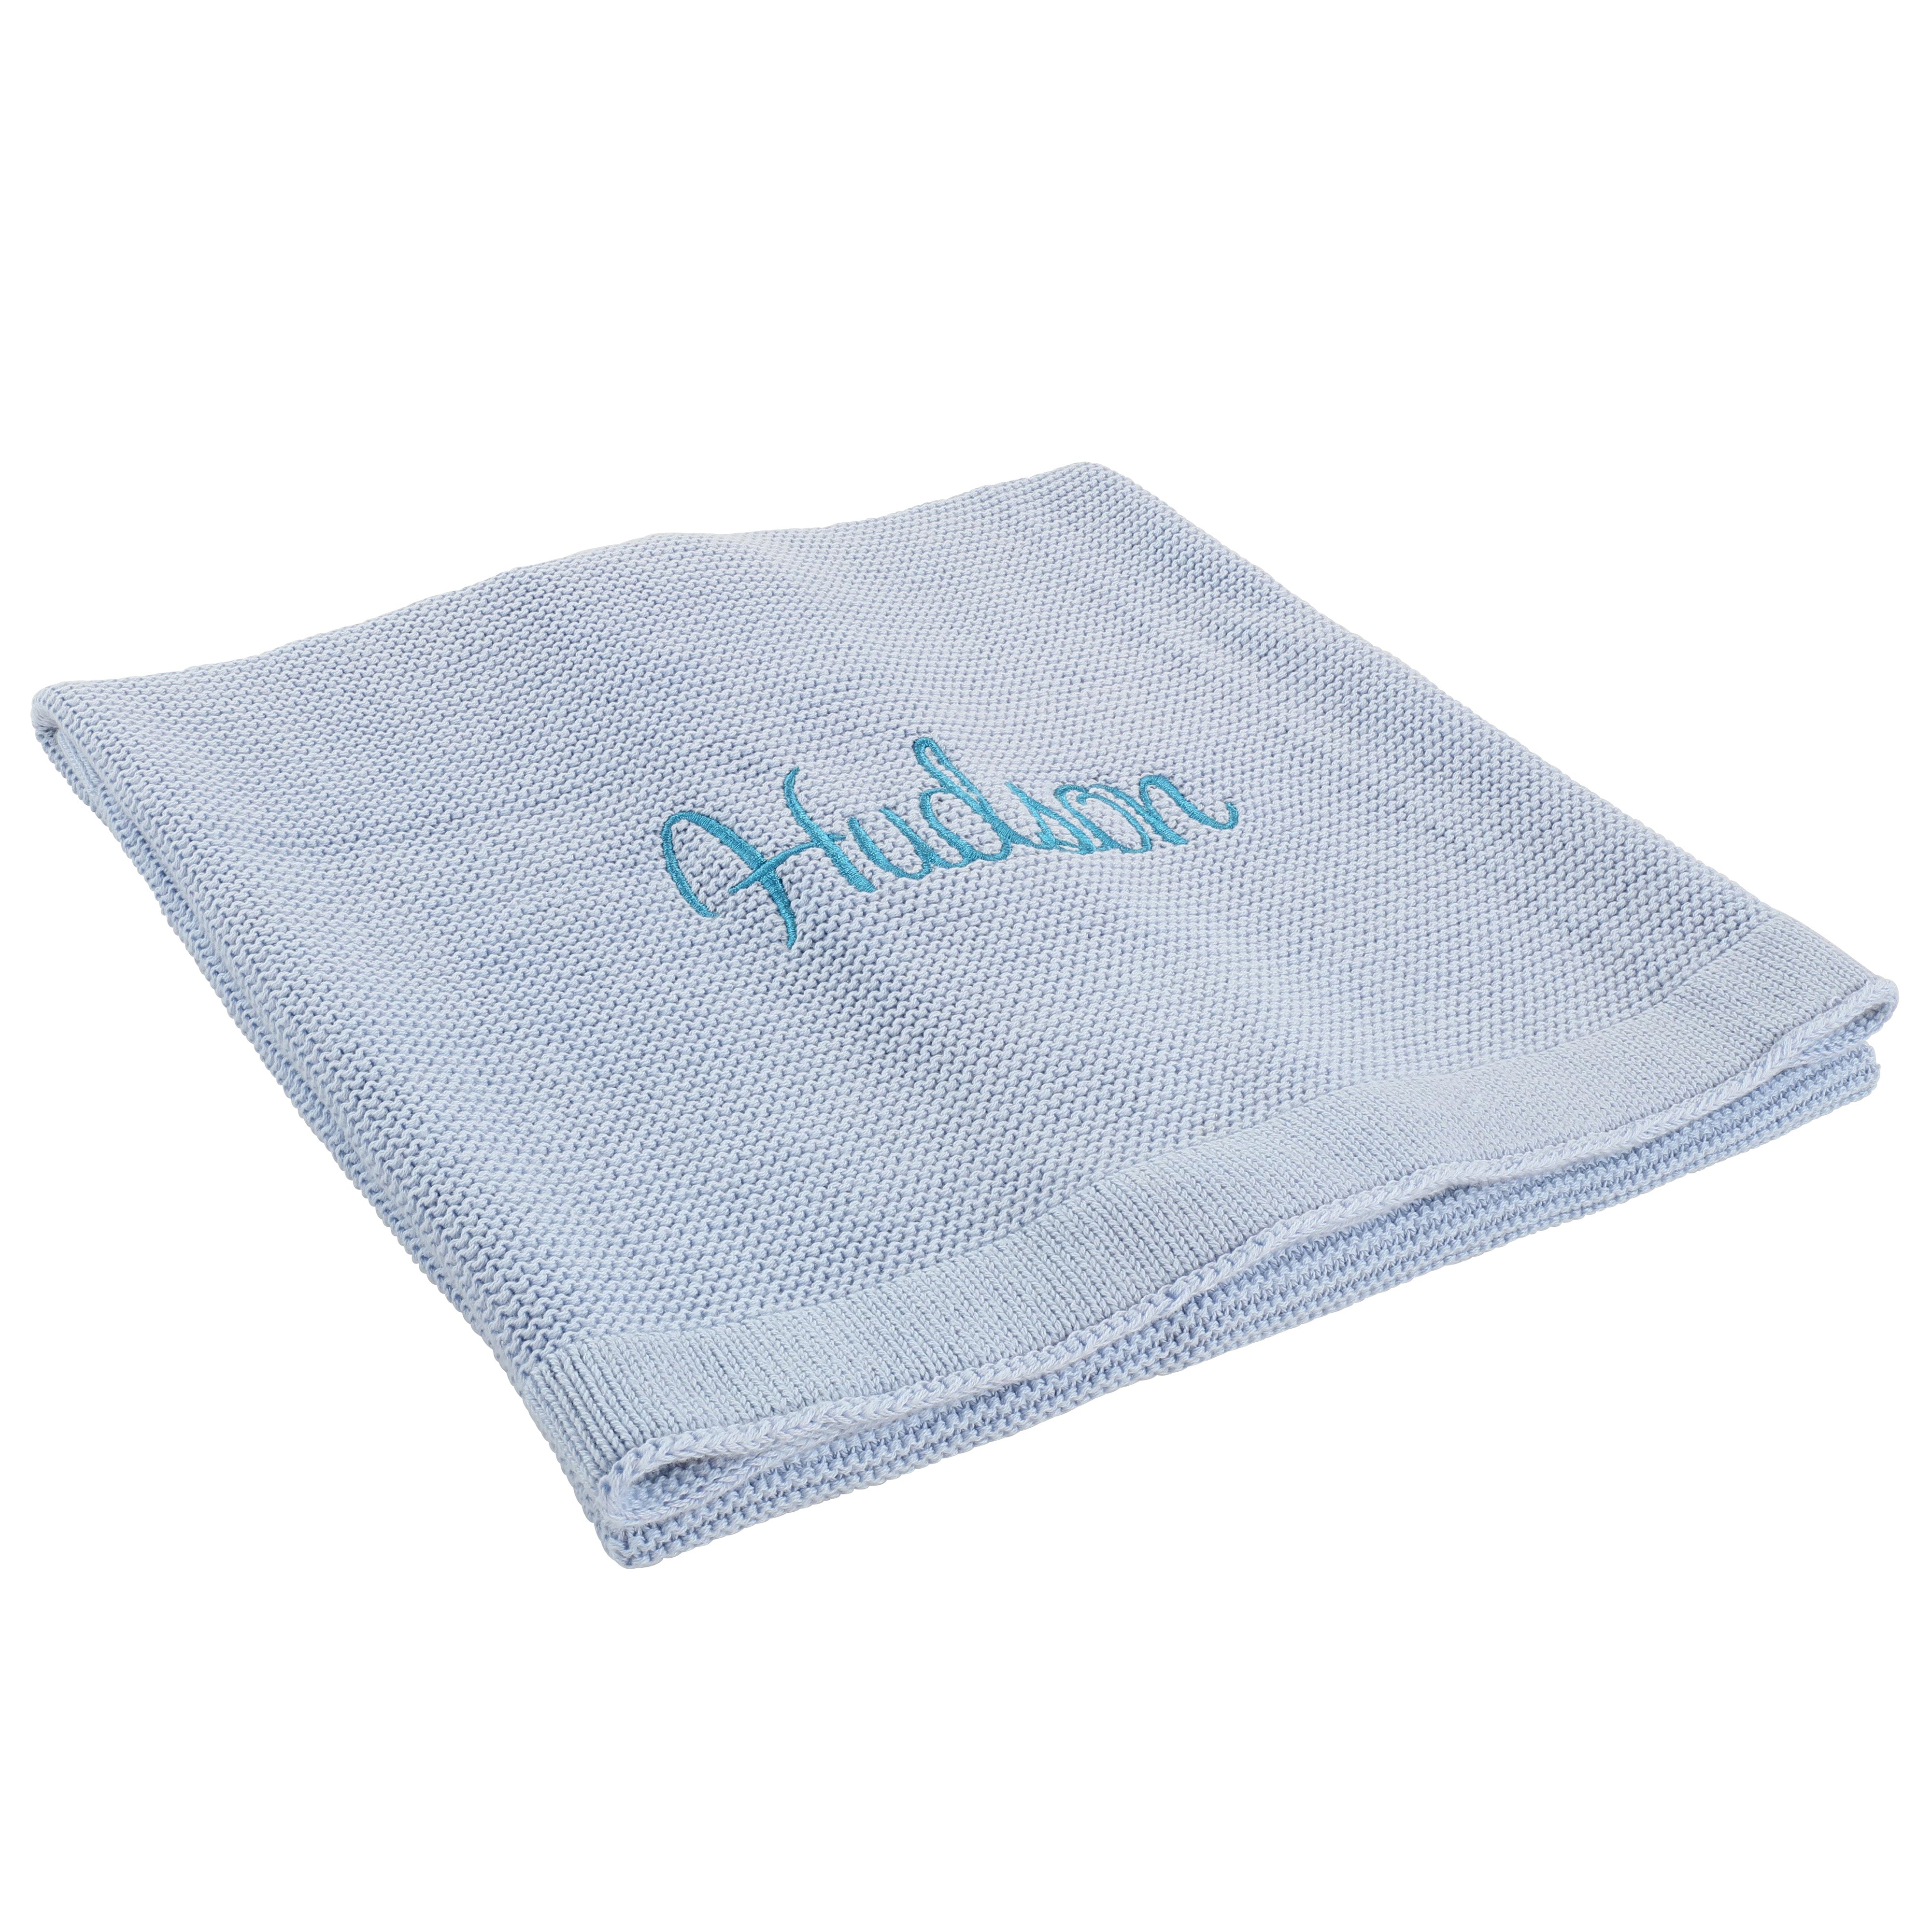 Personalized Baby Blanket, Cotton Knit Blanket Blue